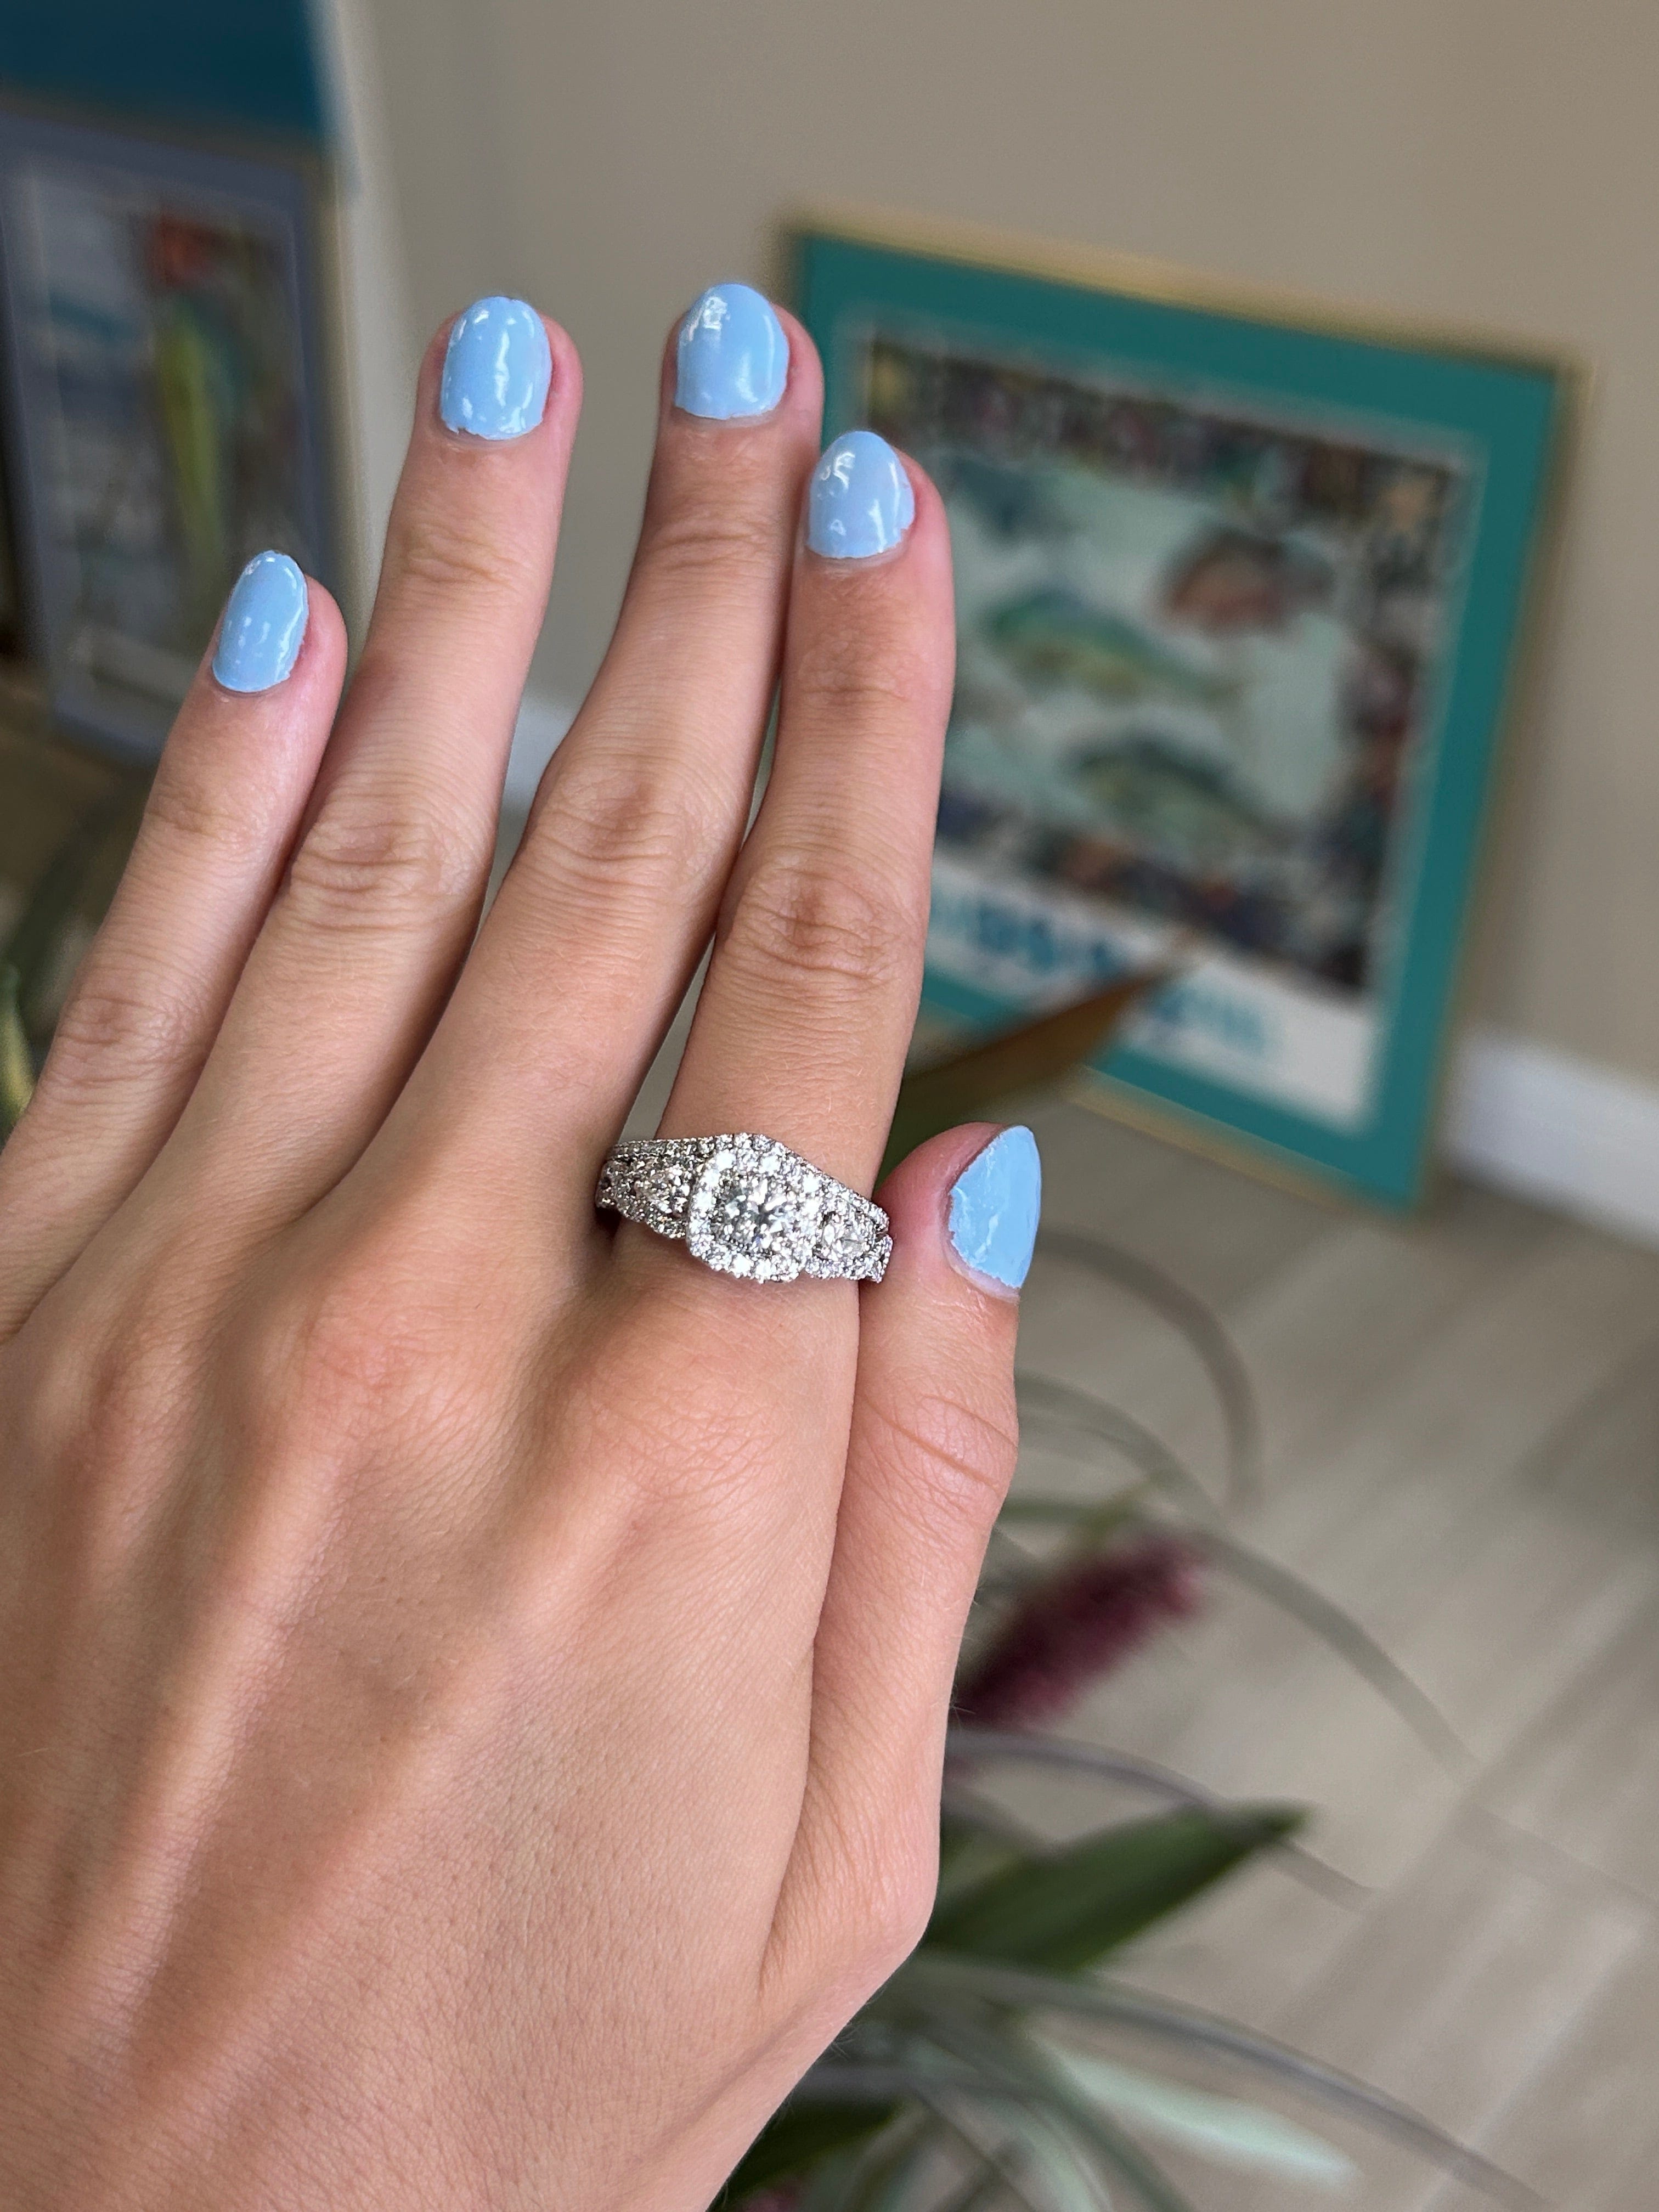 What You Should Know Before Buying an Engagement Ring at a Pawnshop